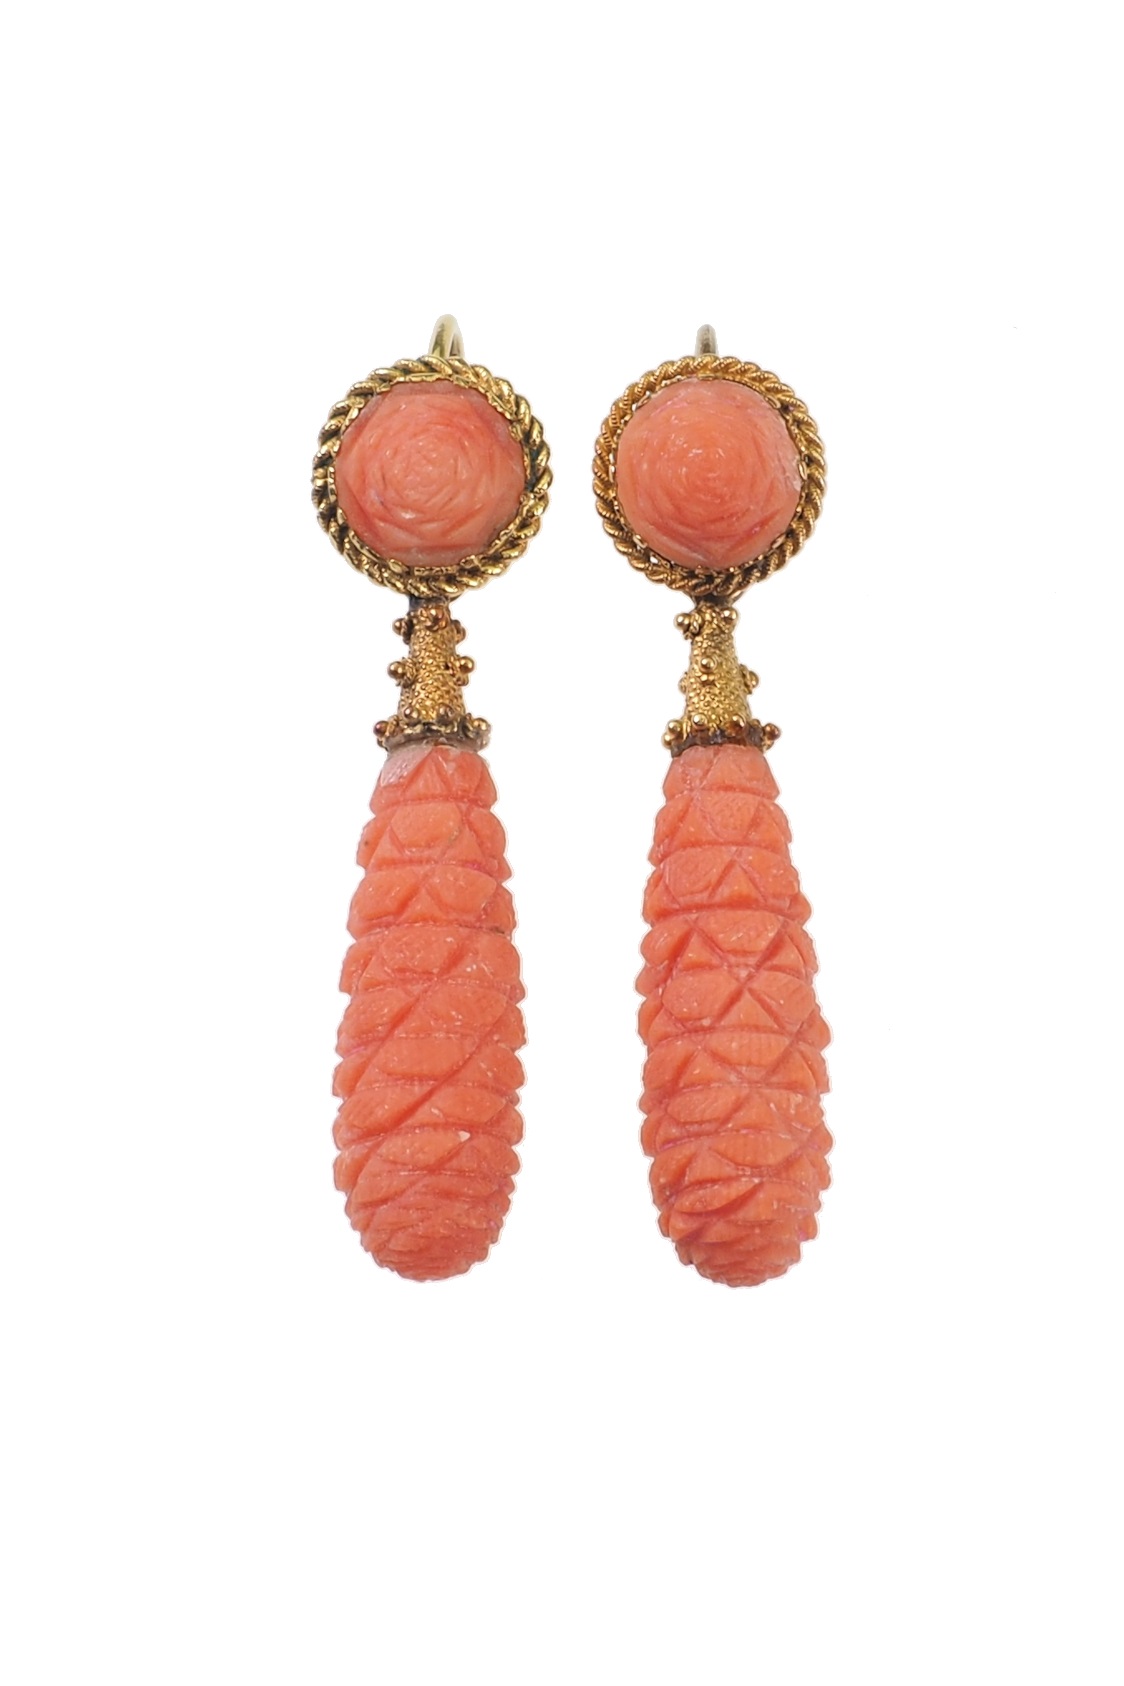 Vintage Clip-on Square Coral Black and Gold Earrings